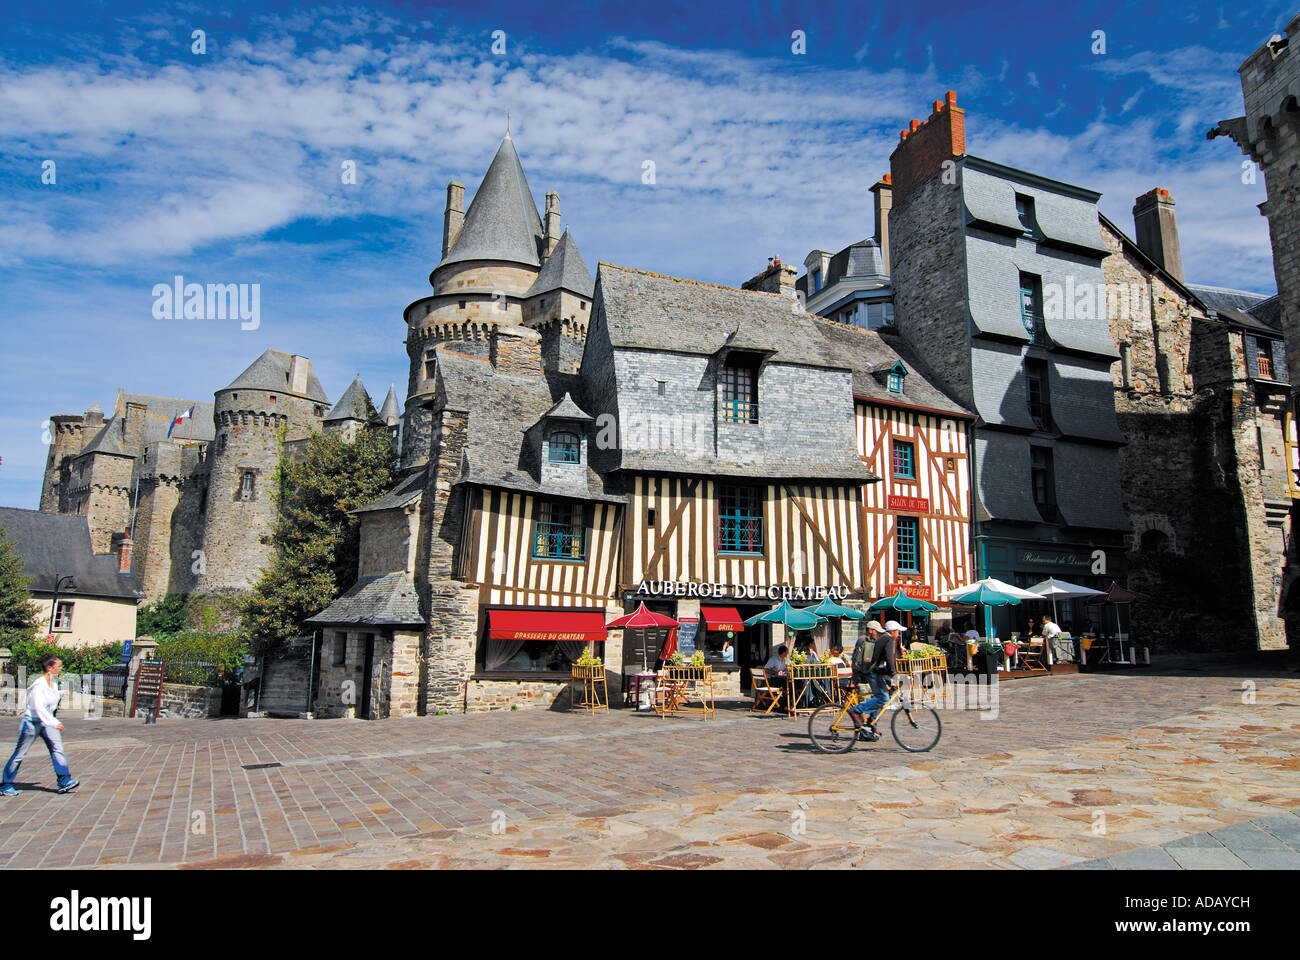 Medieval half-timbered houses at the entrance of Vitré, Brittany, France Stock Photo